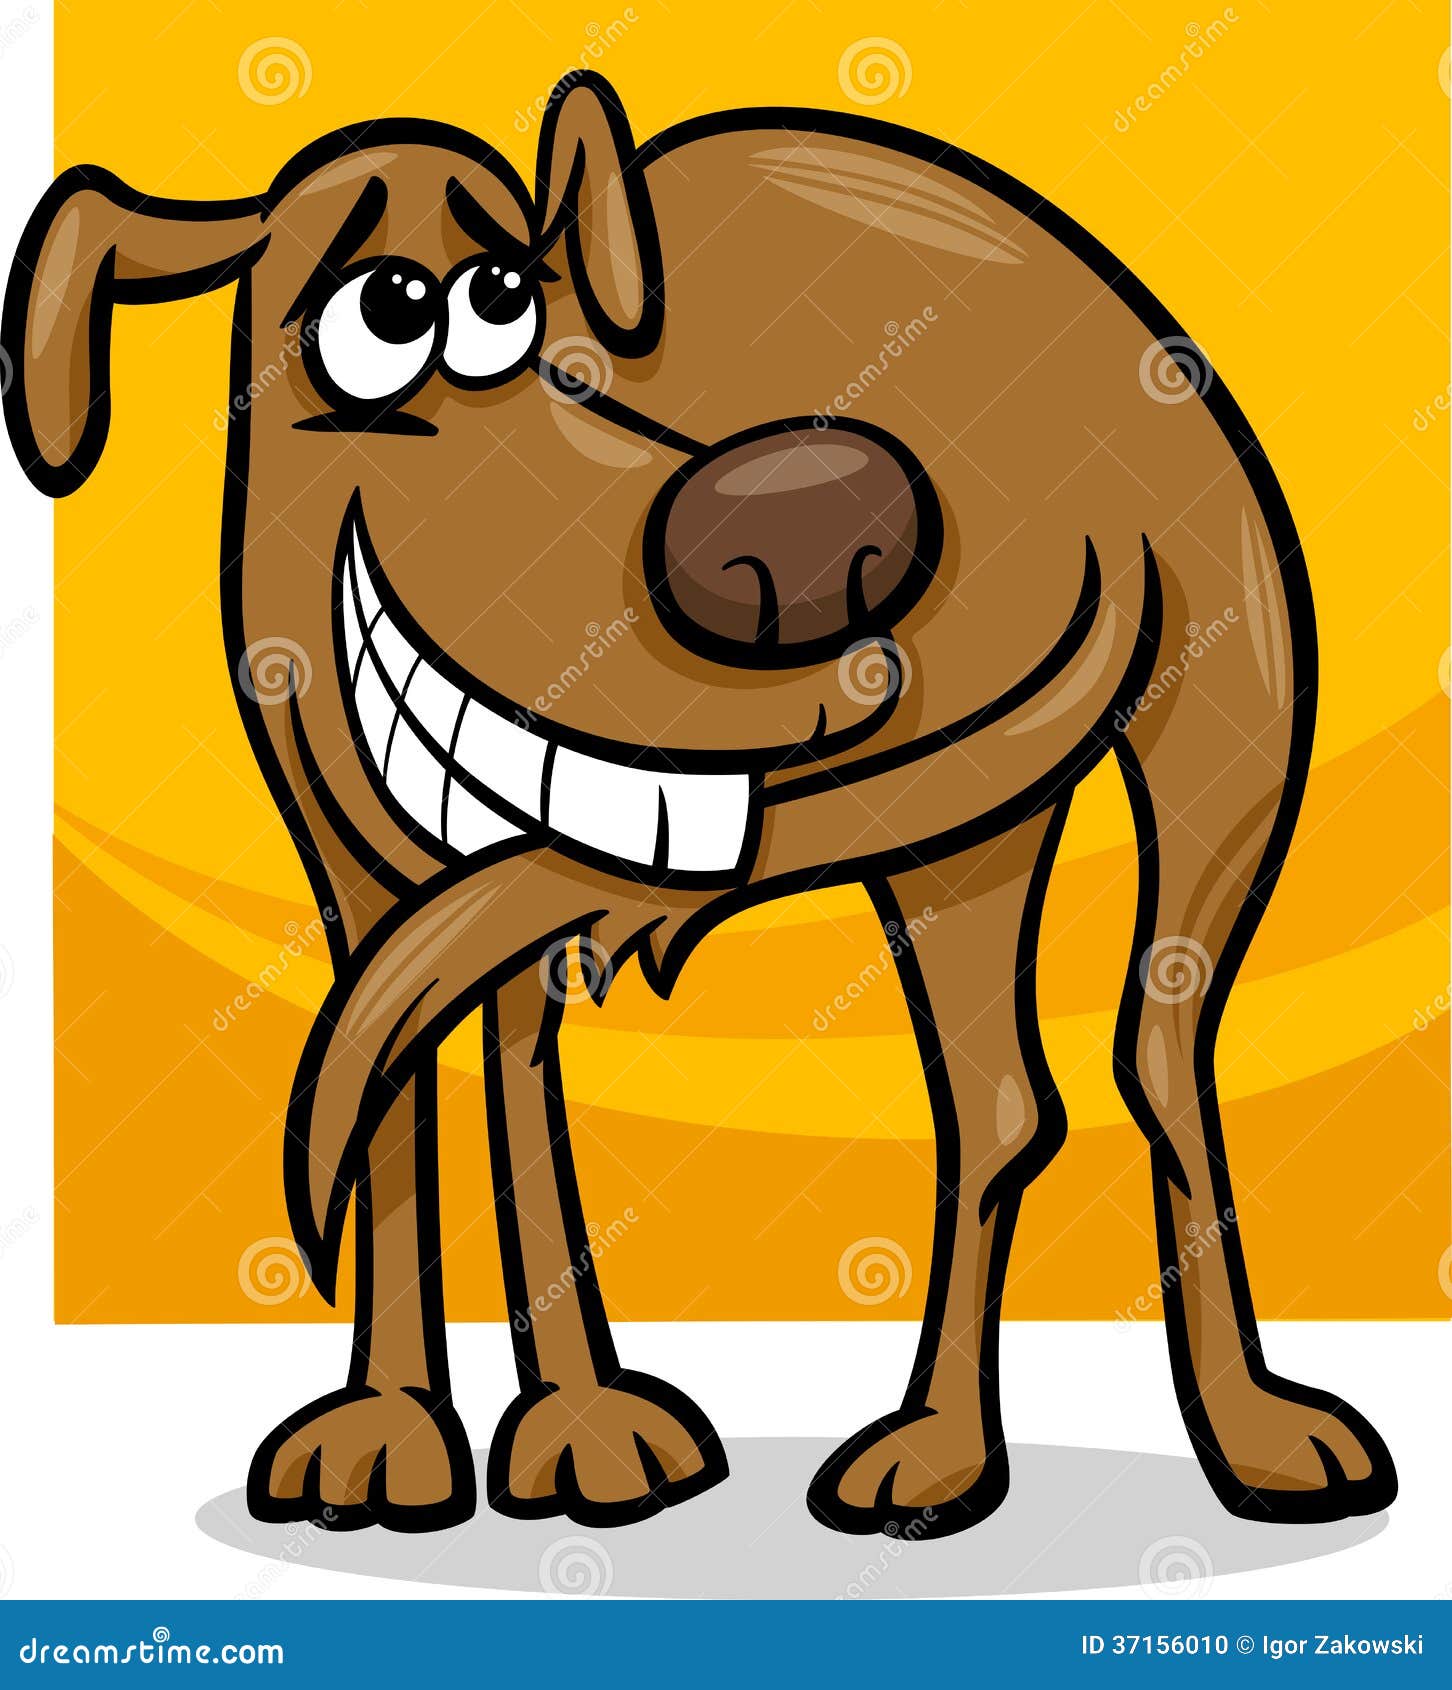 clipart dog chasing tail - photo #13